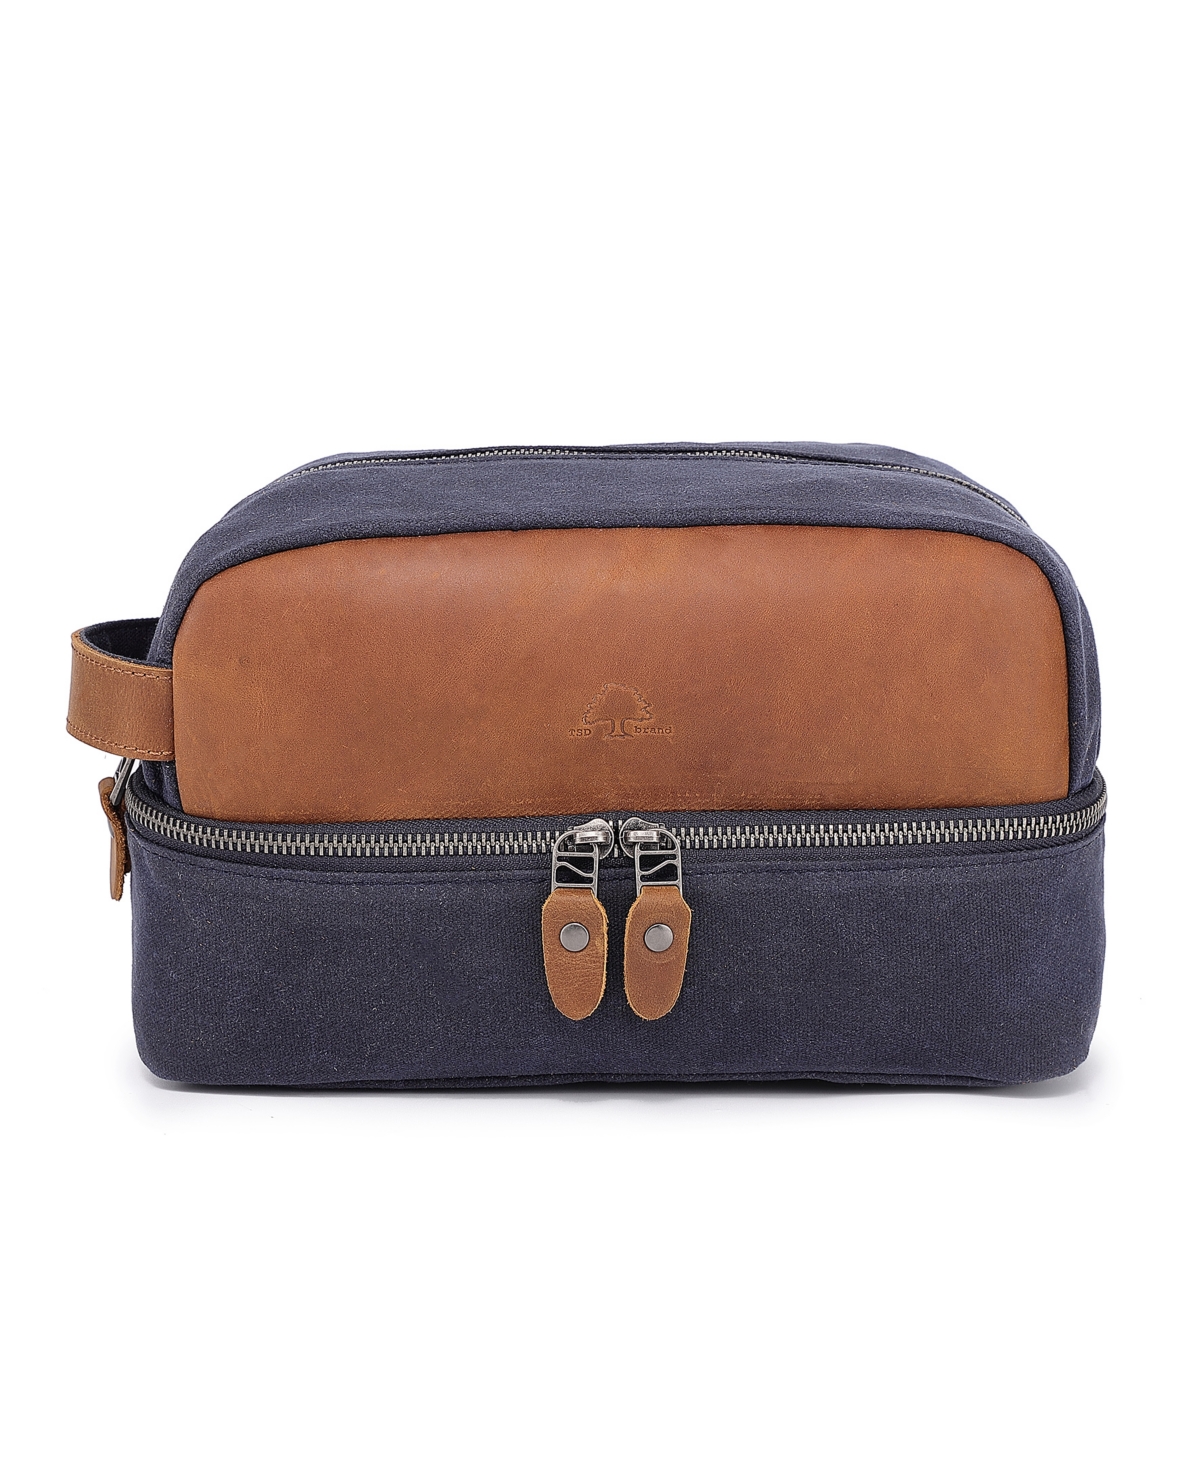 Stone Creek Waxed Canvas Toiletry Bag - Olive